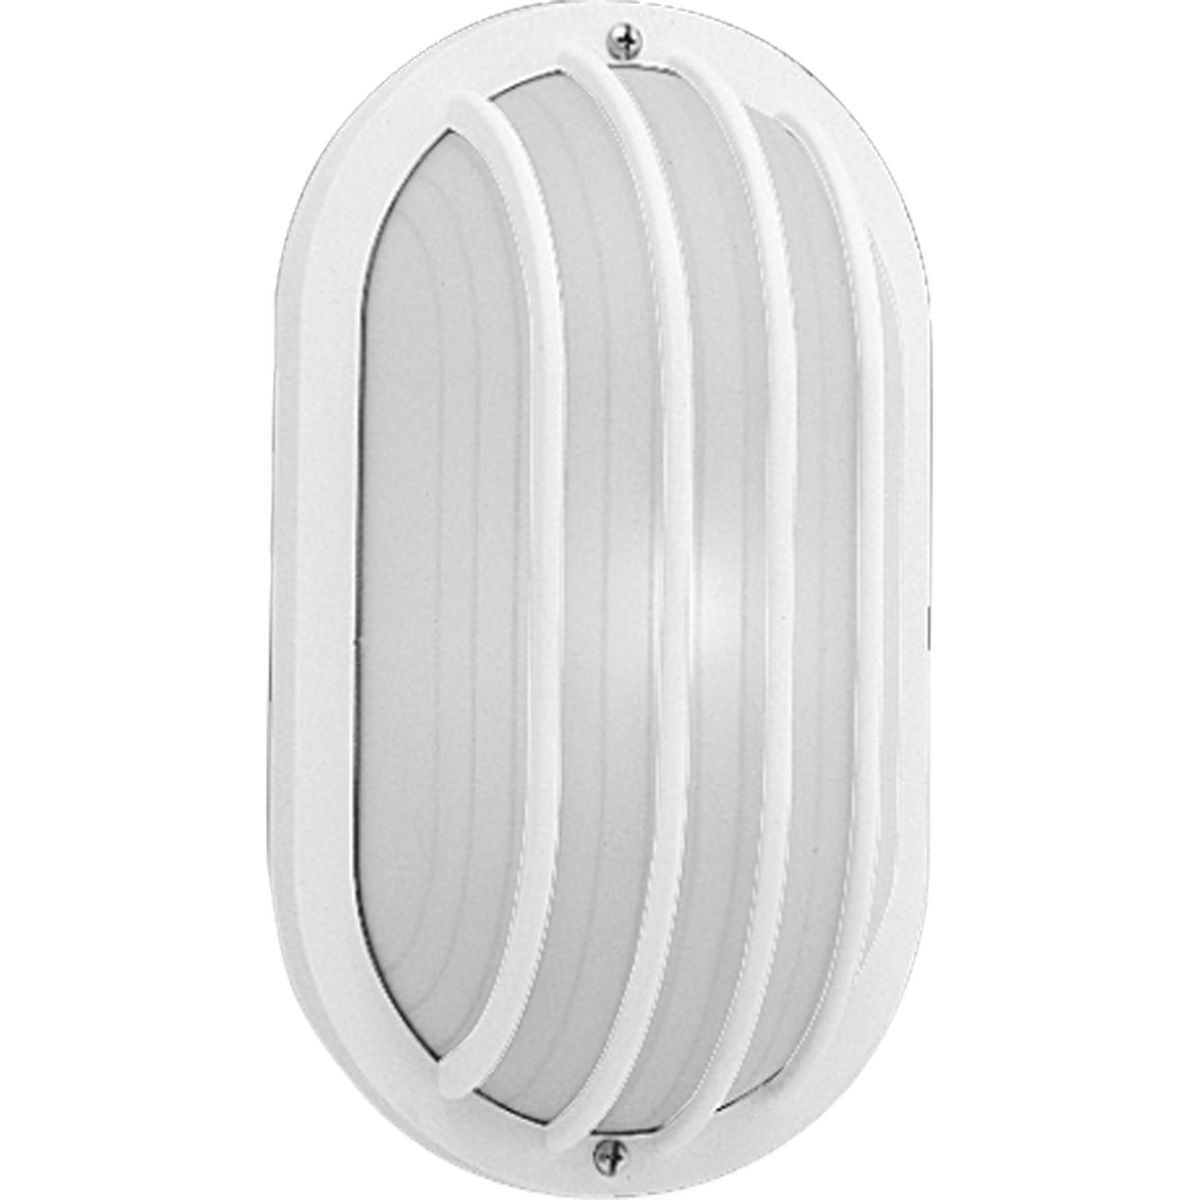 One-Light 10-1/2" Wall or Ceiling Mount Bulkhead - Wet Location Listed - Model P5706-30